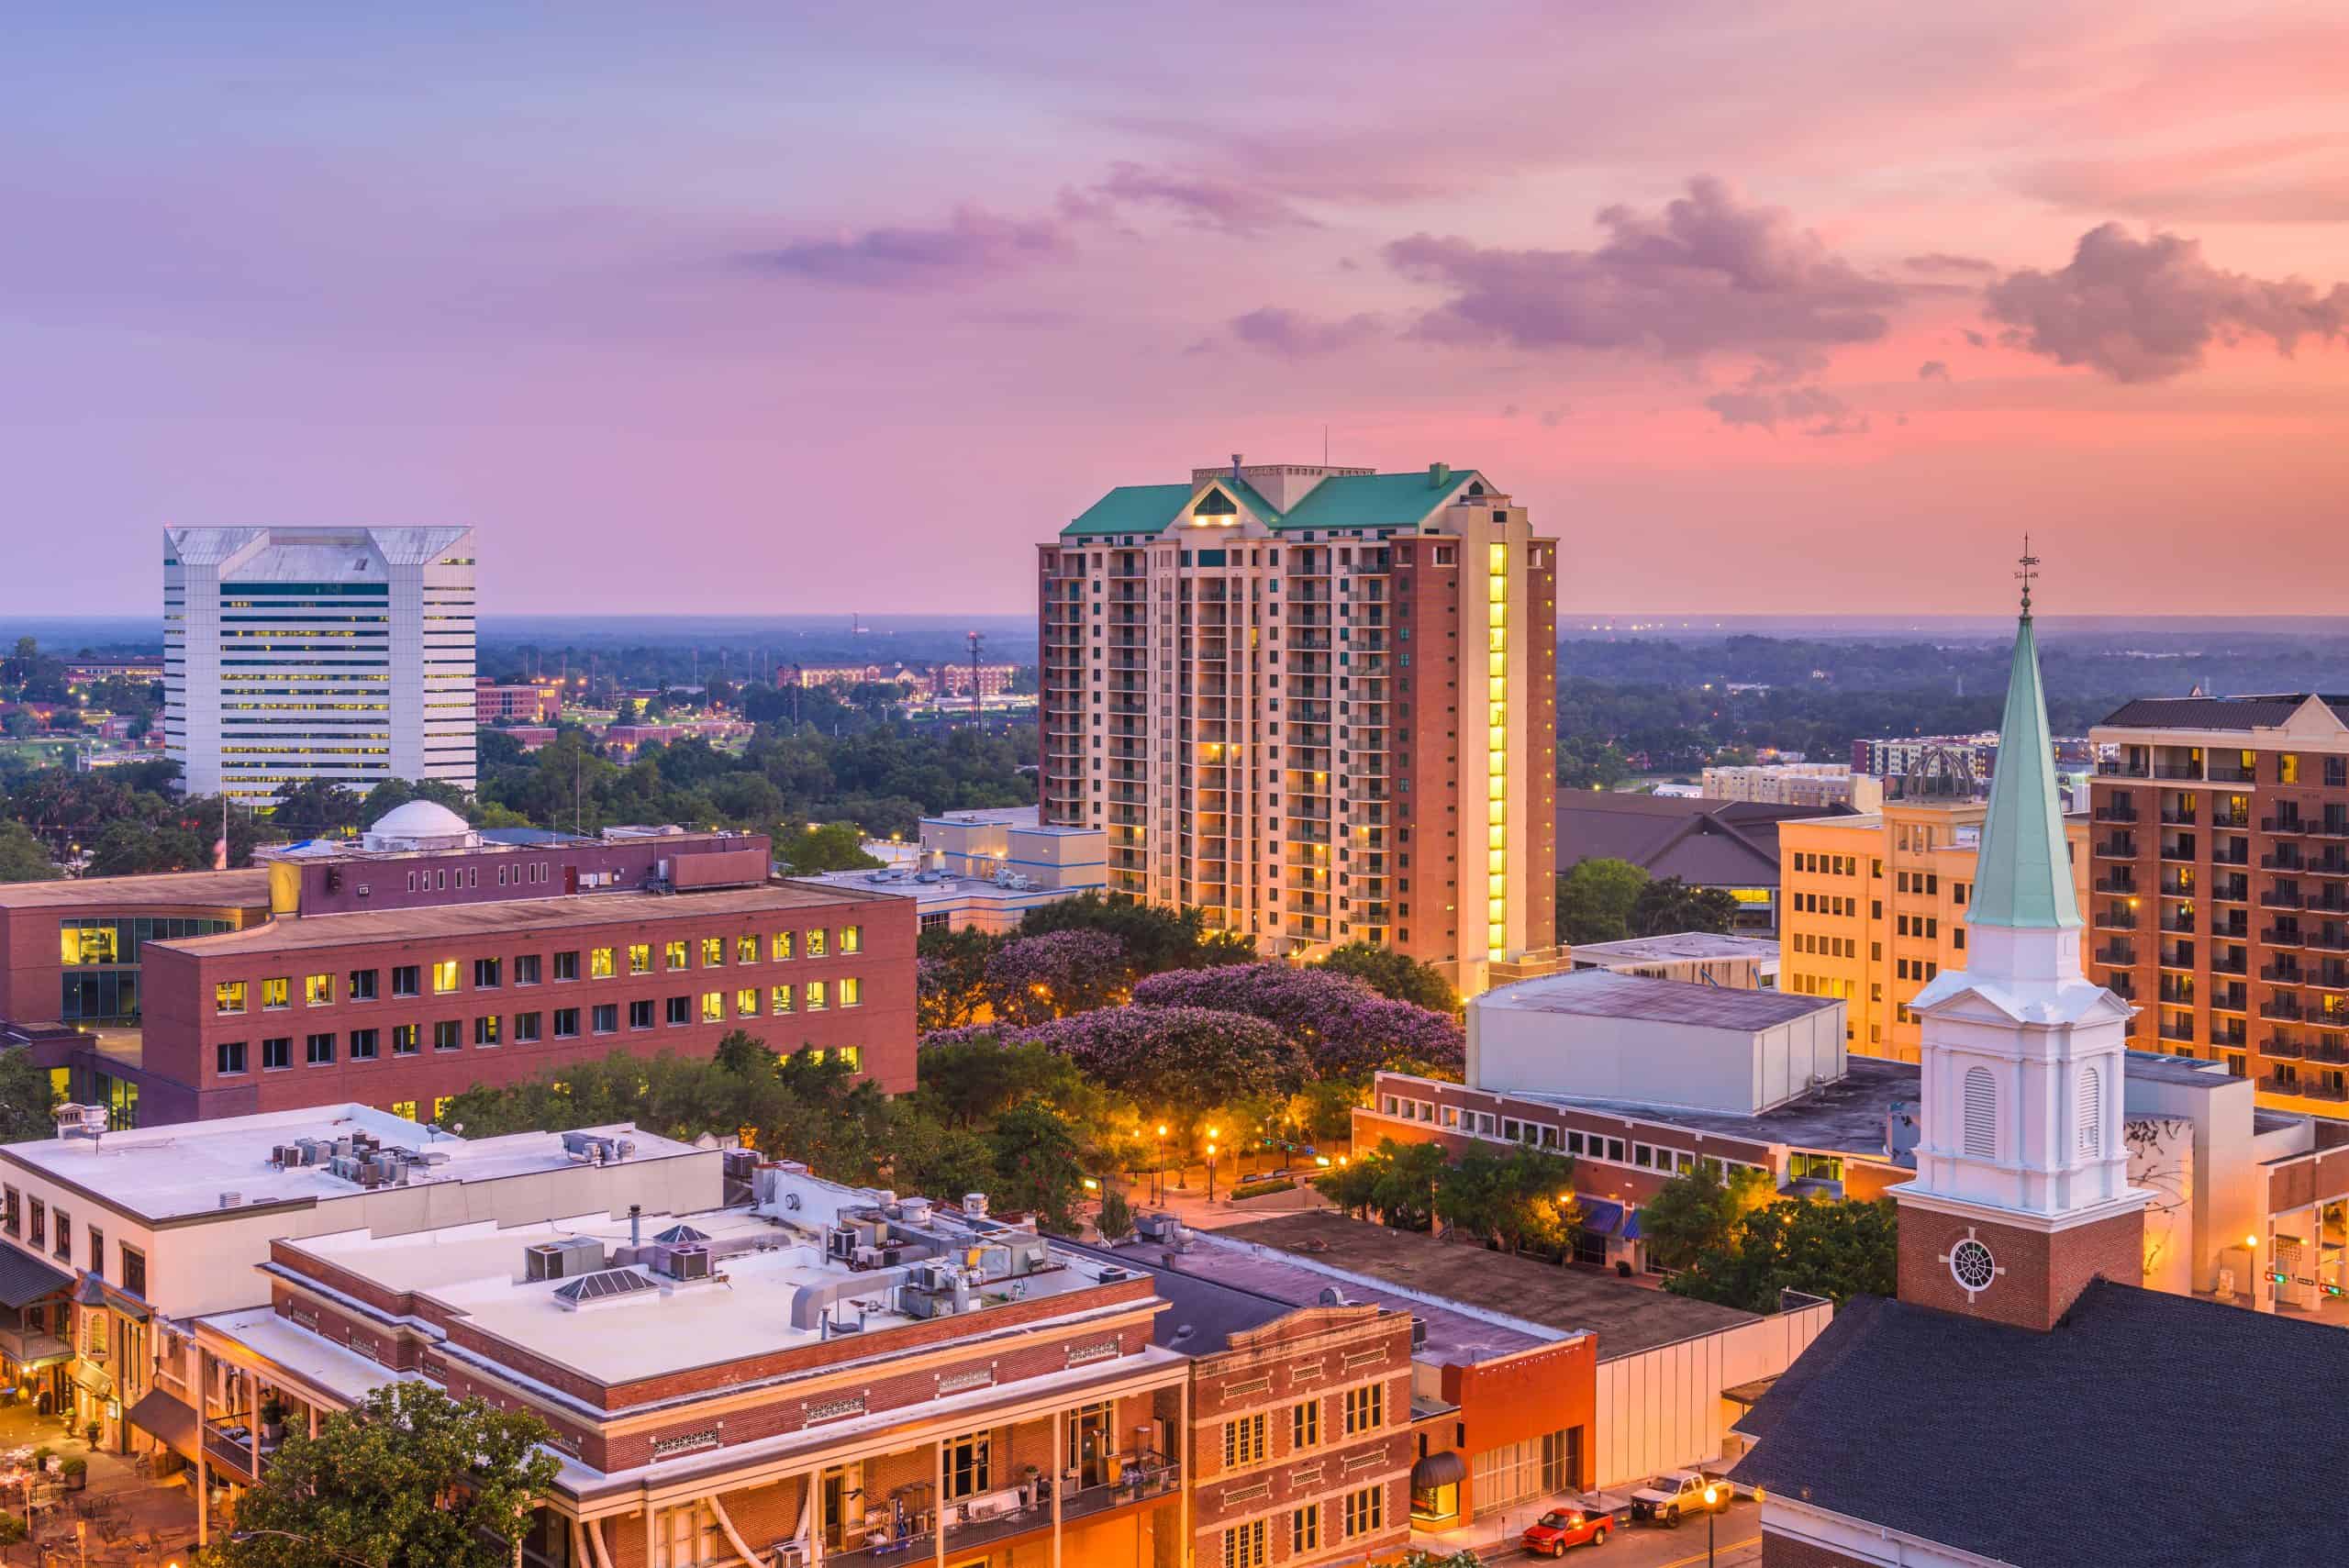 20 Best Things To Do In Tallahassee, FL, You Shouldn't Miss Florida